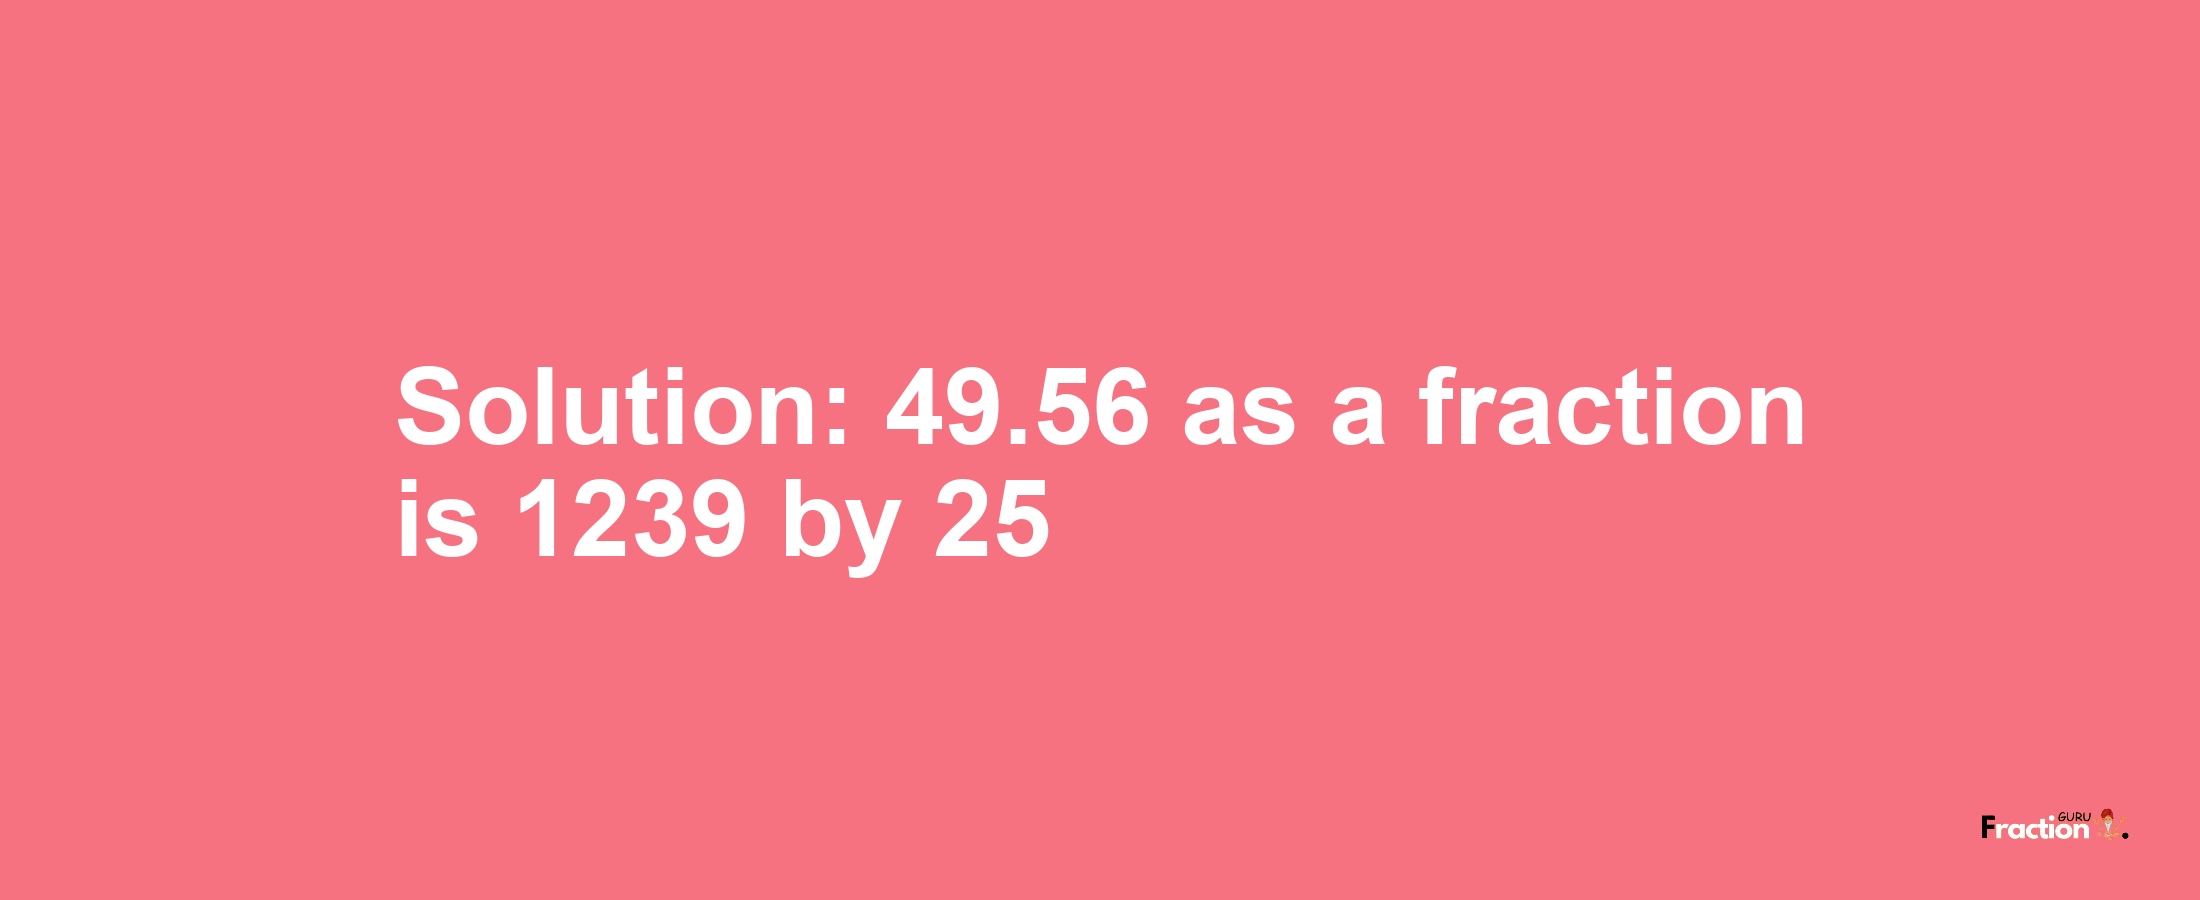 Solution:49.56 as a fraction is 1239/25